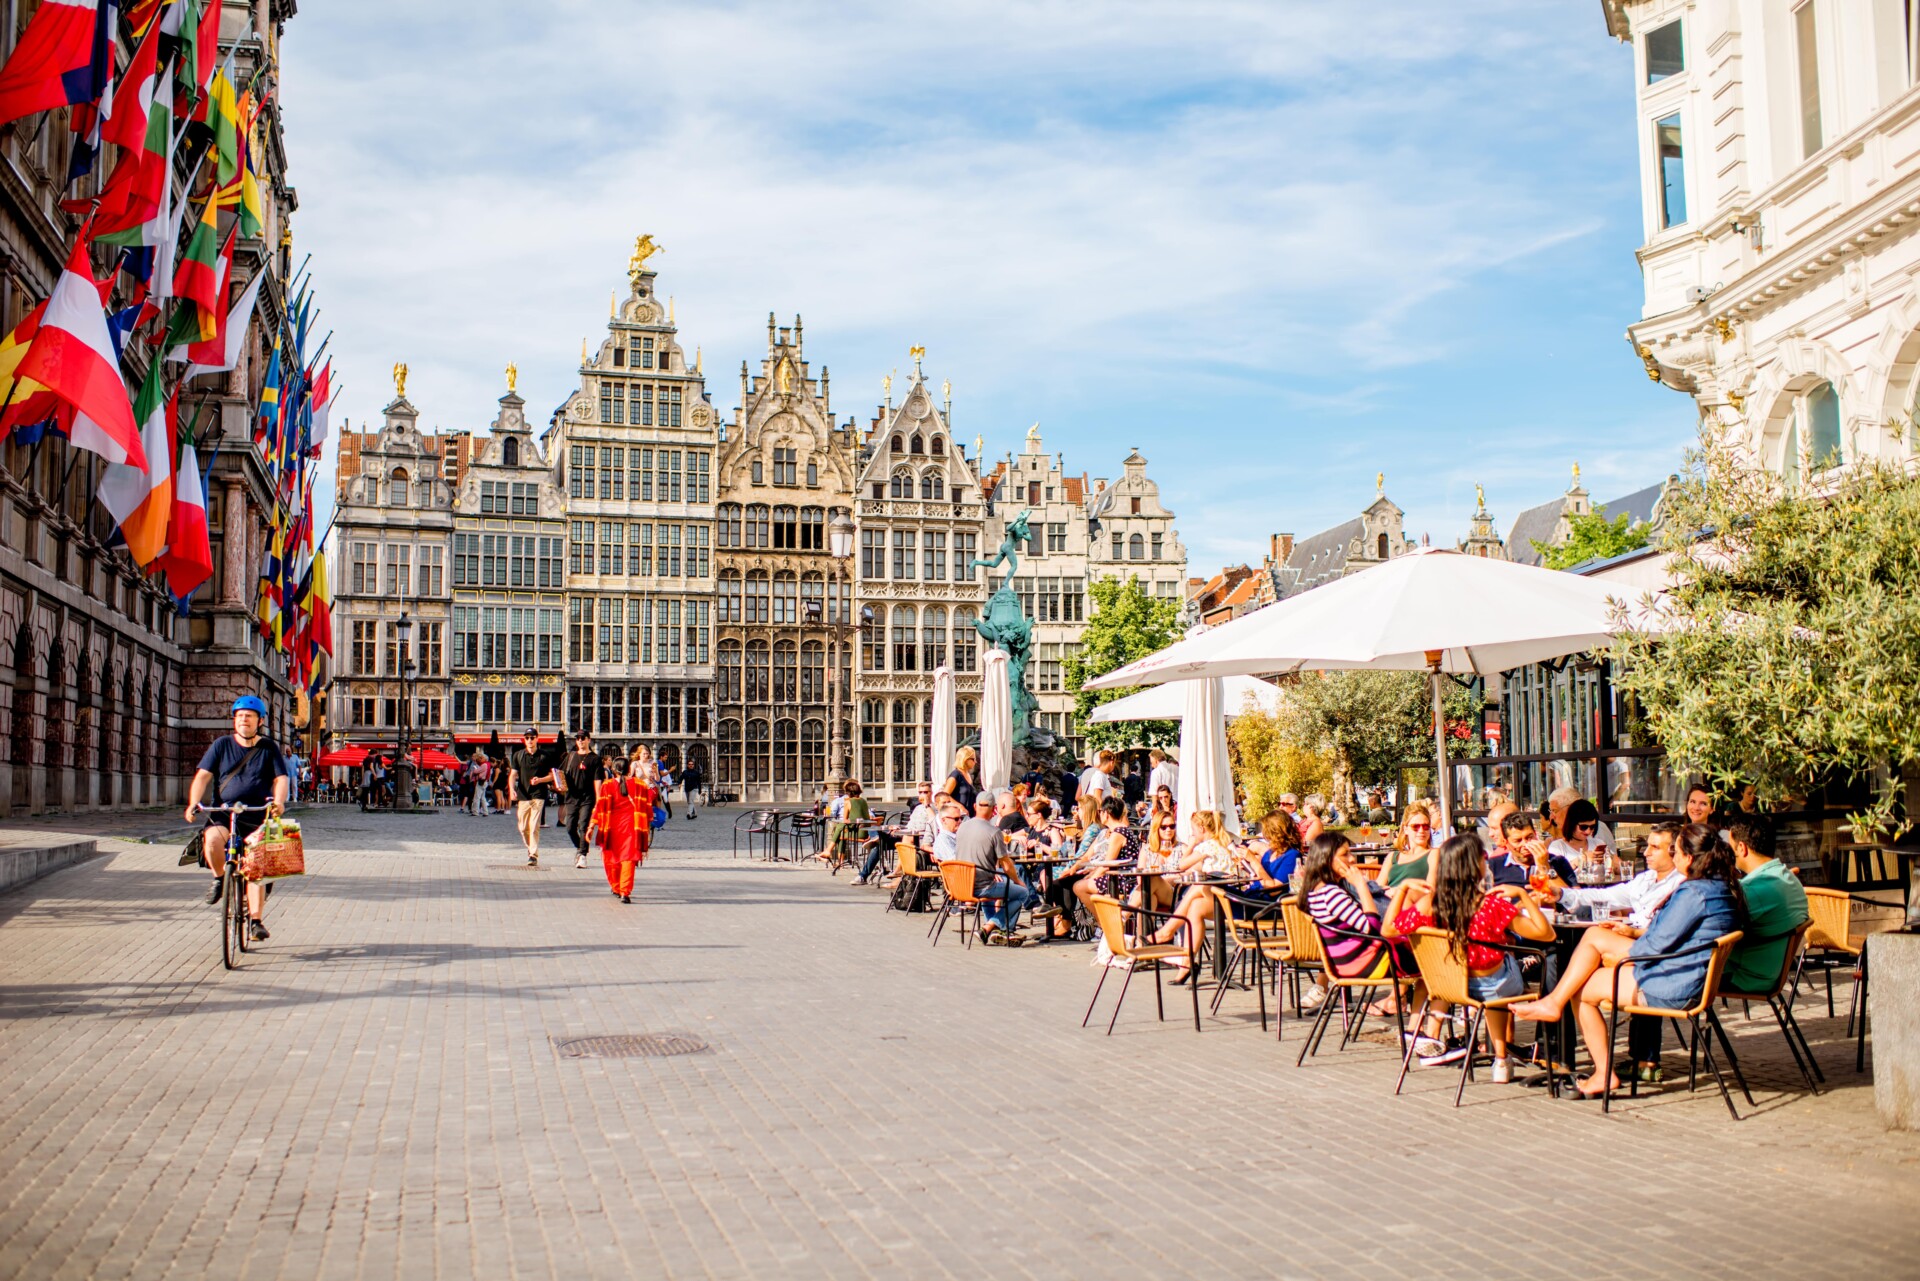 The main square in Antwerp